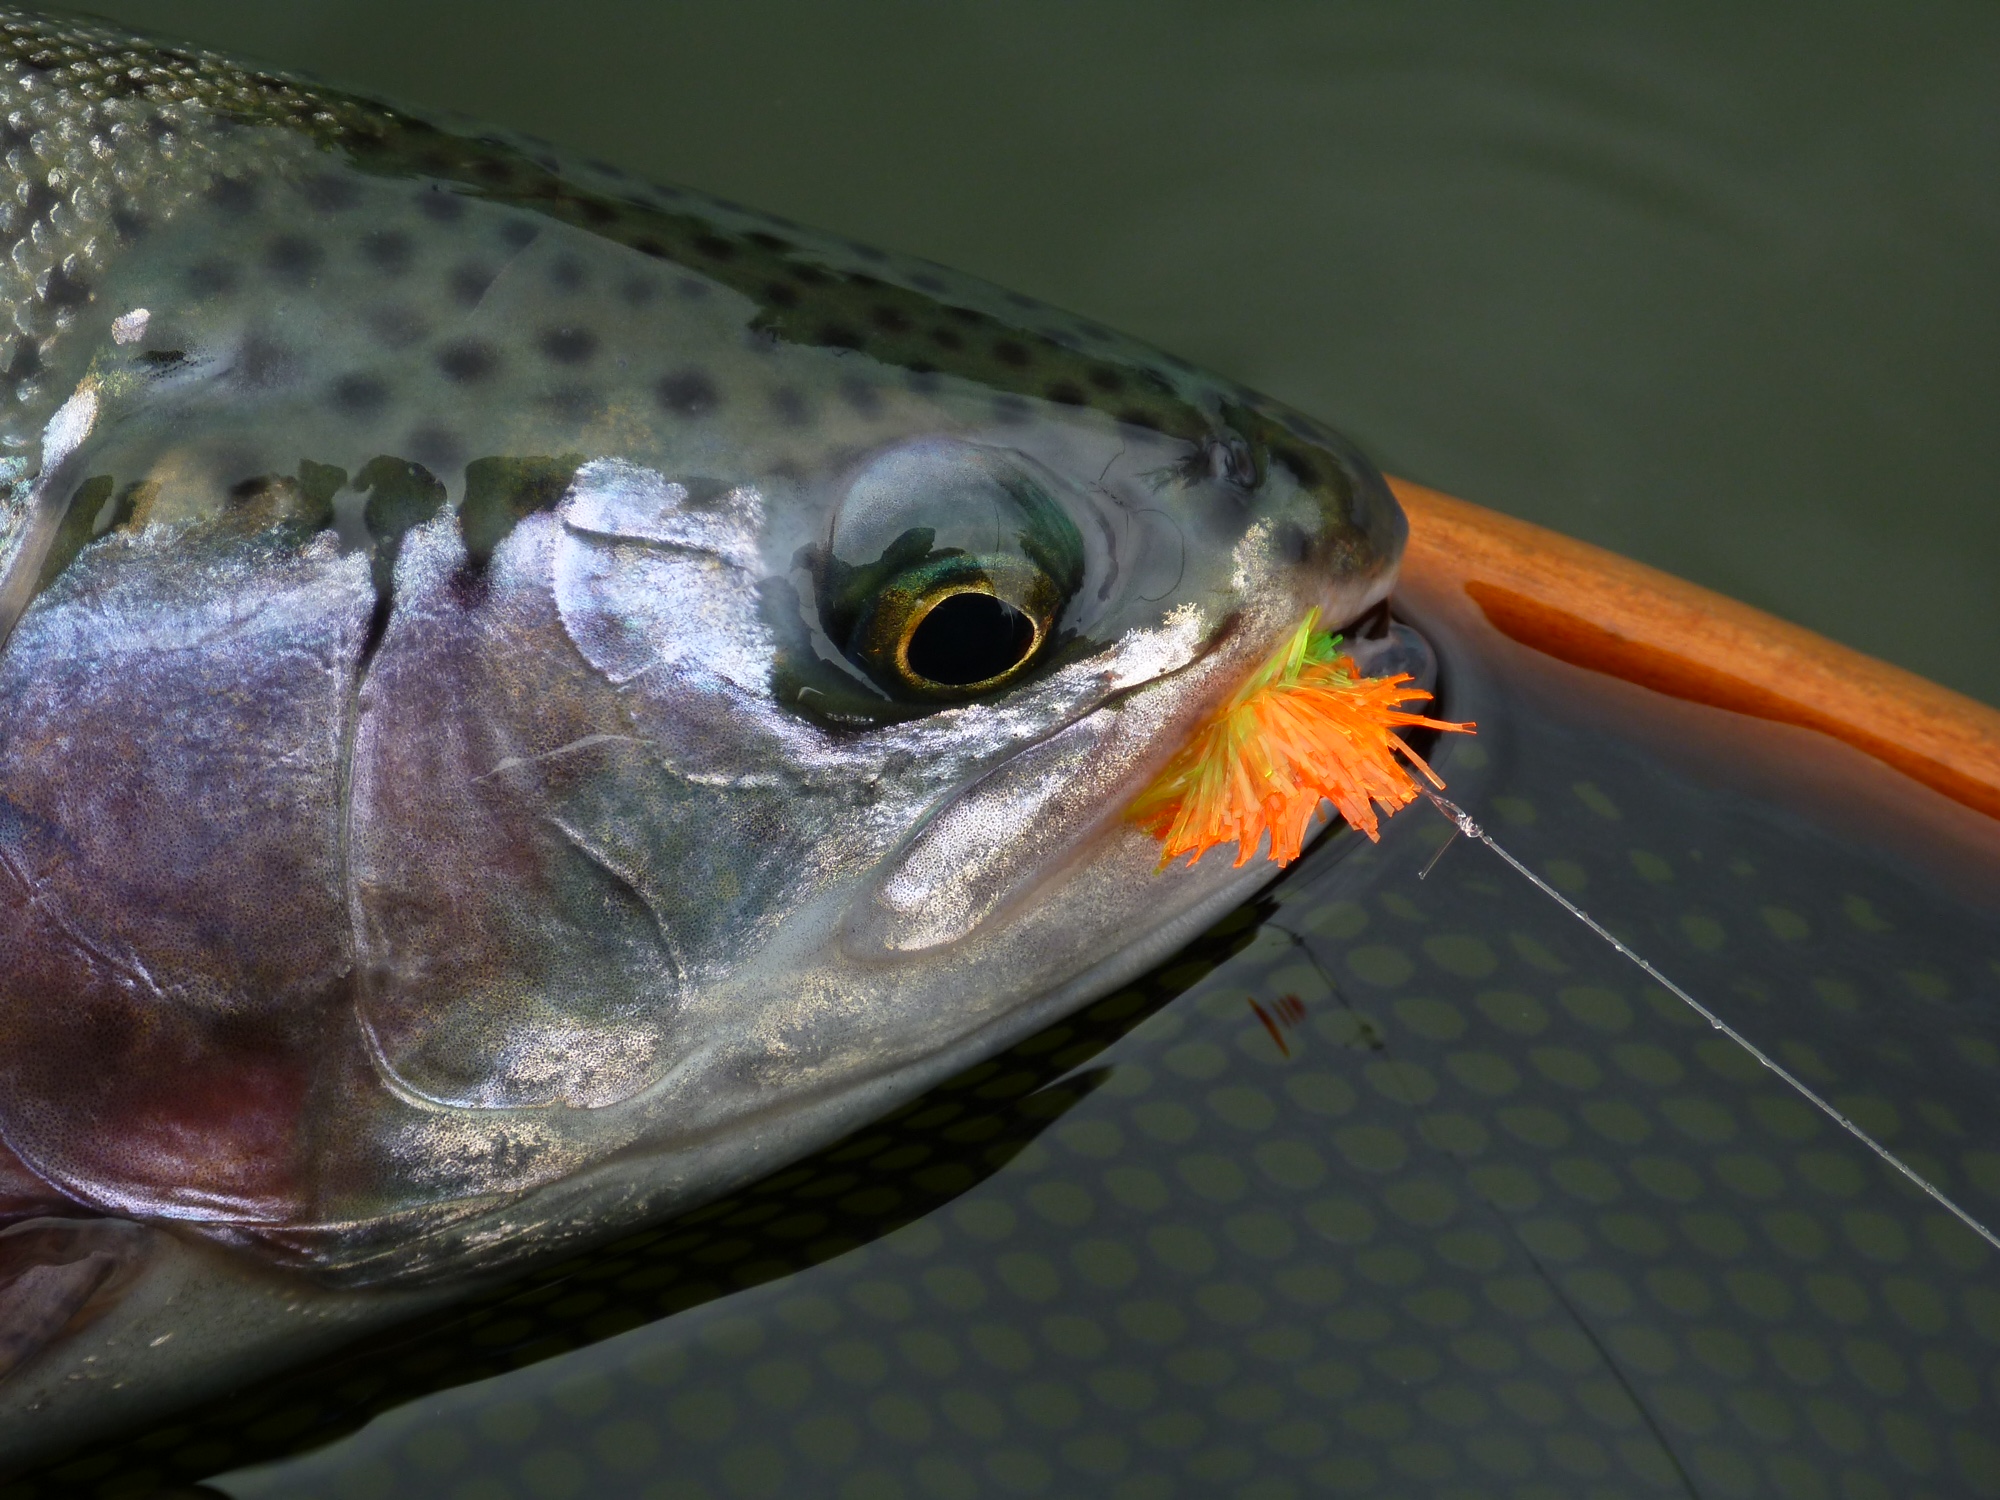 The Blob – Fly Fish Food